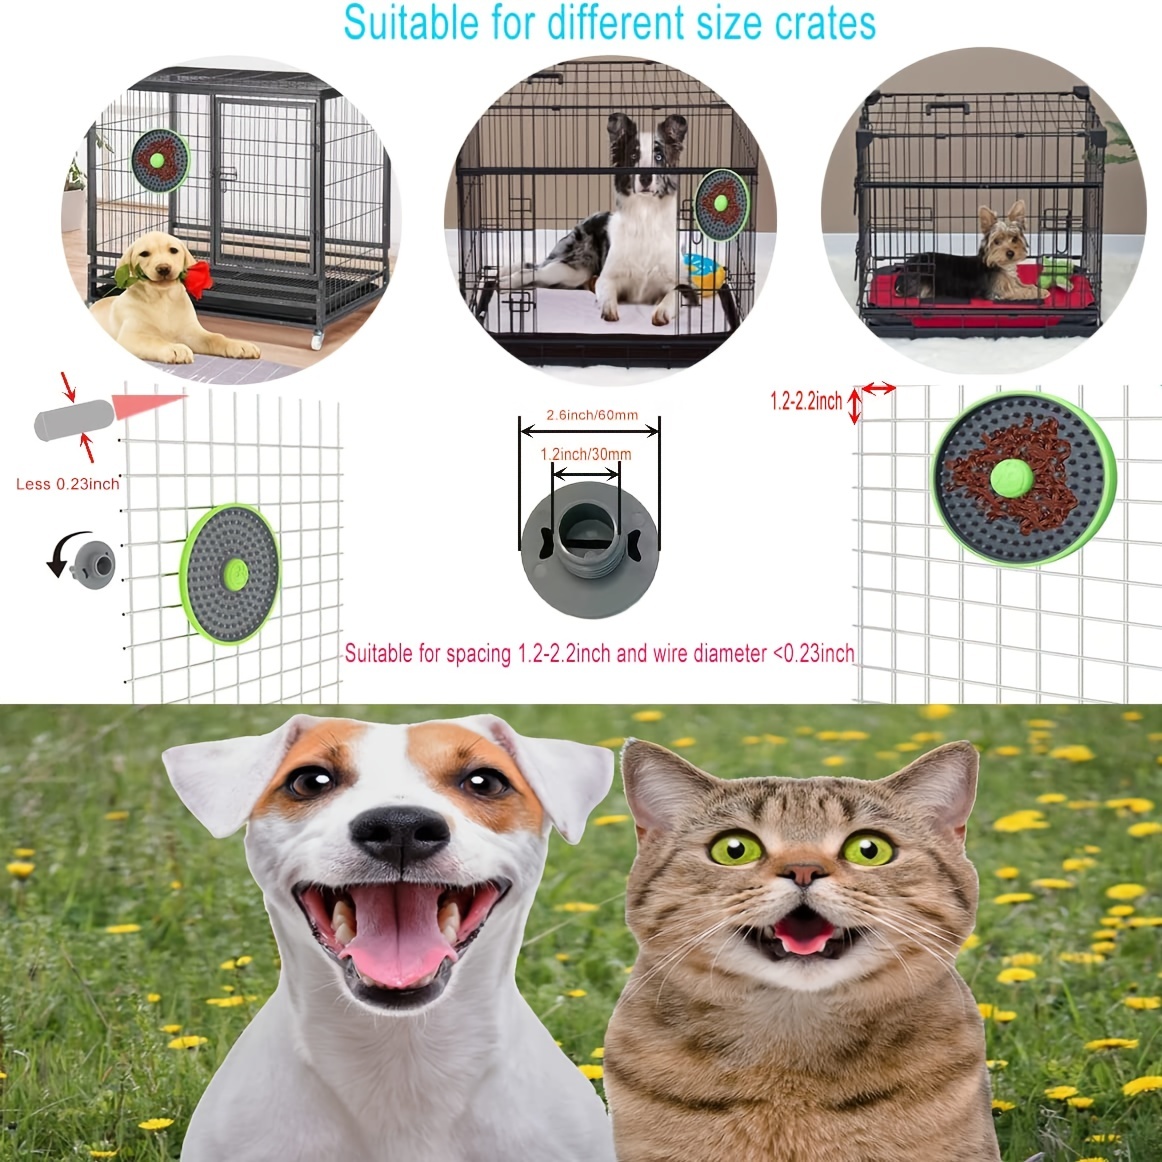  Dog Lick Mat or Cat Lick Mat, for Dog Crate Training